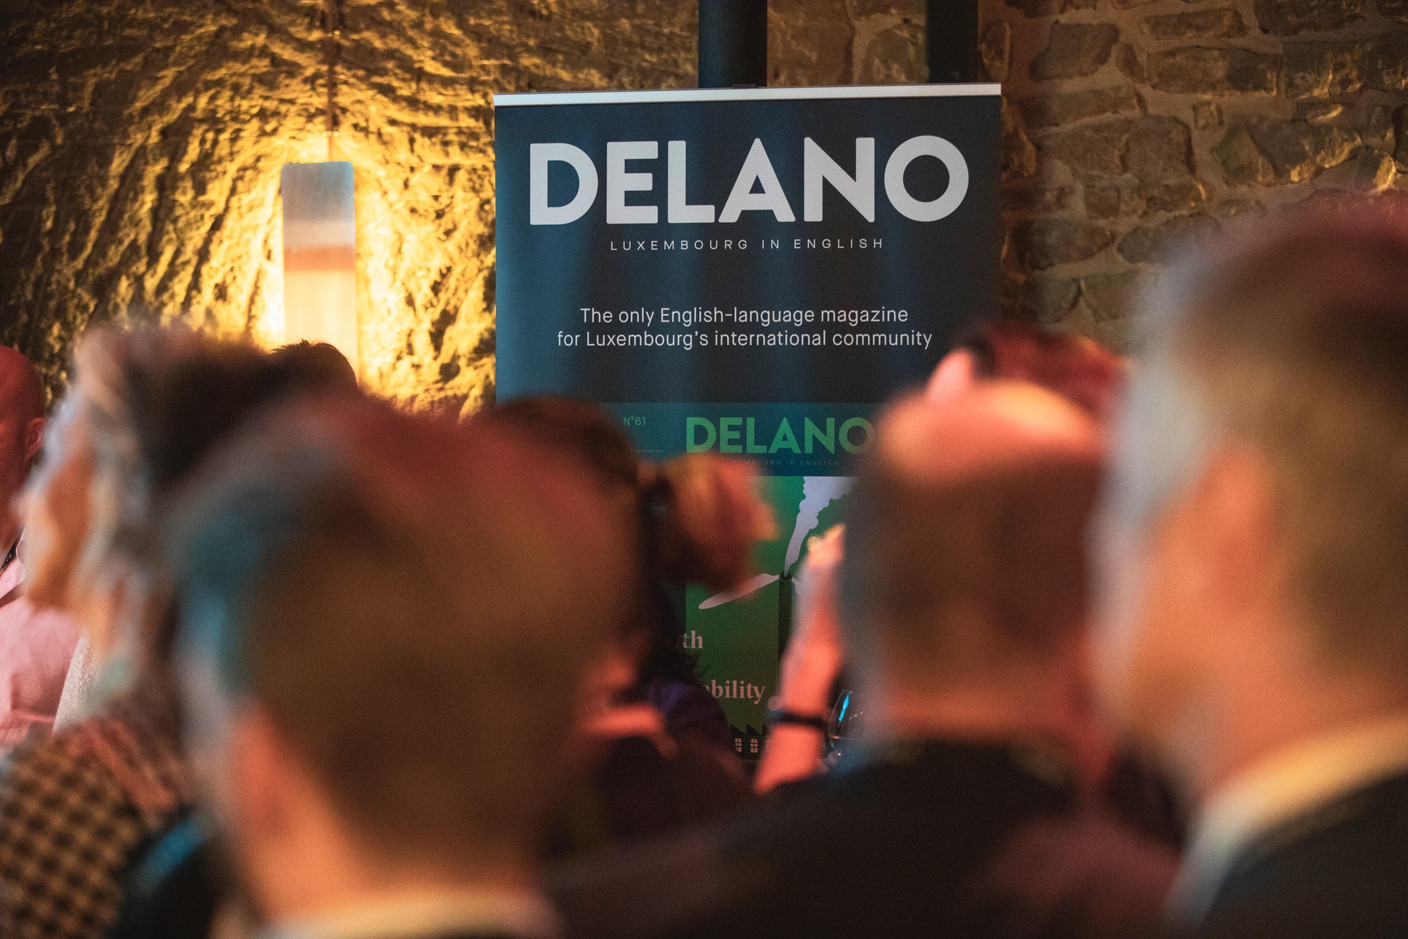 Delano Live: How to move up without burning out? - 16.11.2021 (Photo: VERJUS SIMON, Maison Moderne Publishing SA)